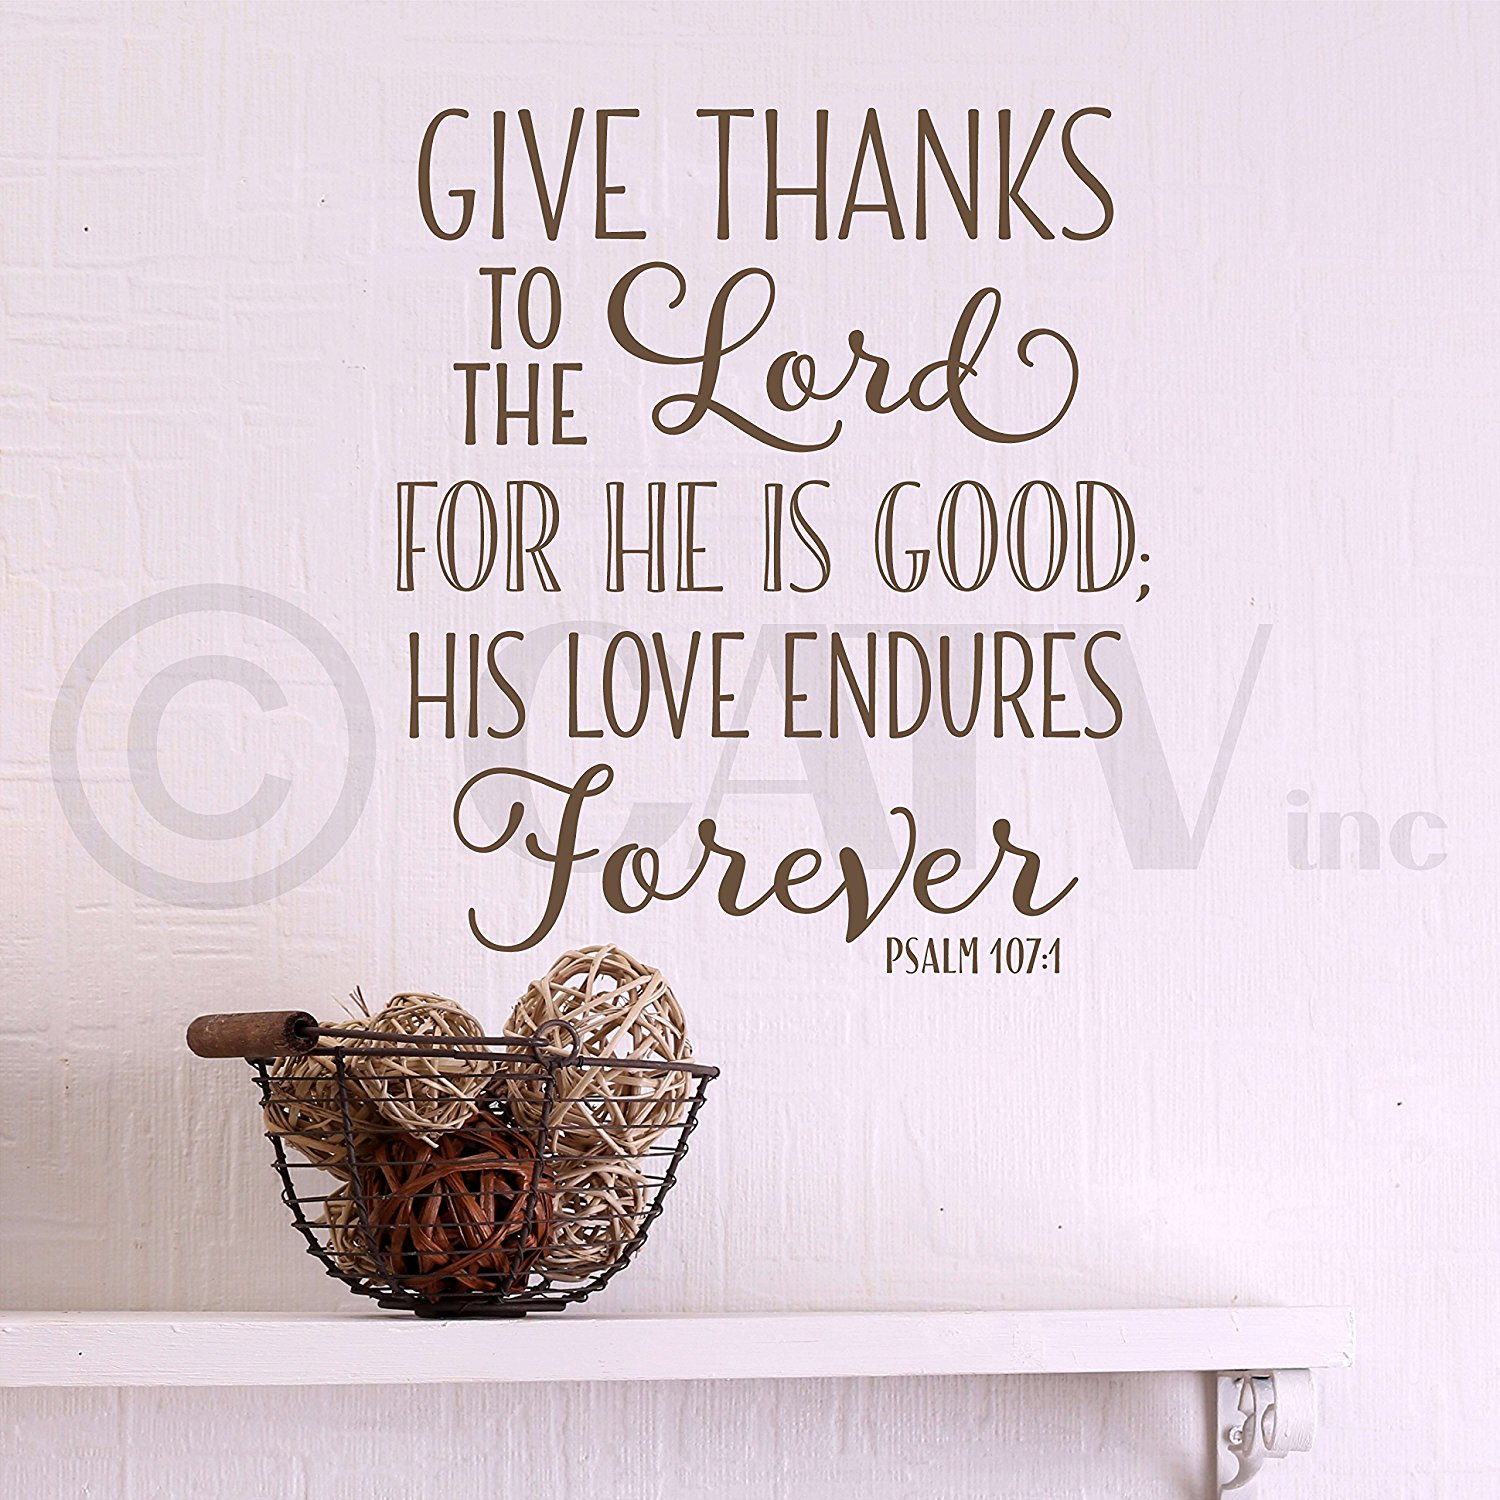 His love endures forever vinyl wall decal Give thanks to the Lord for He is good